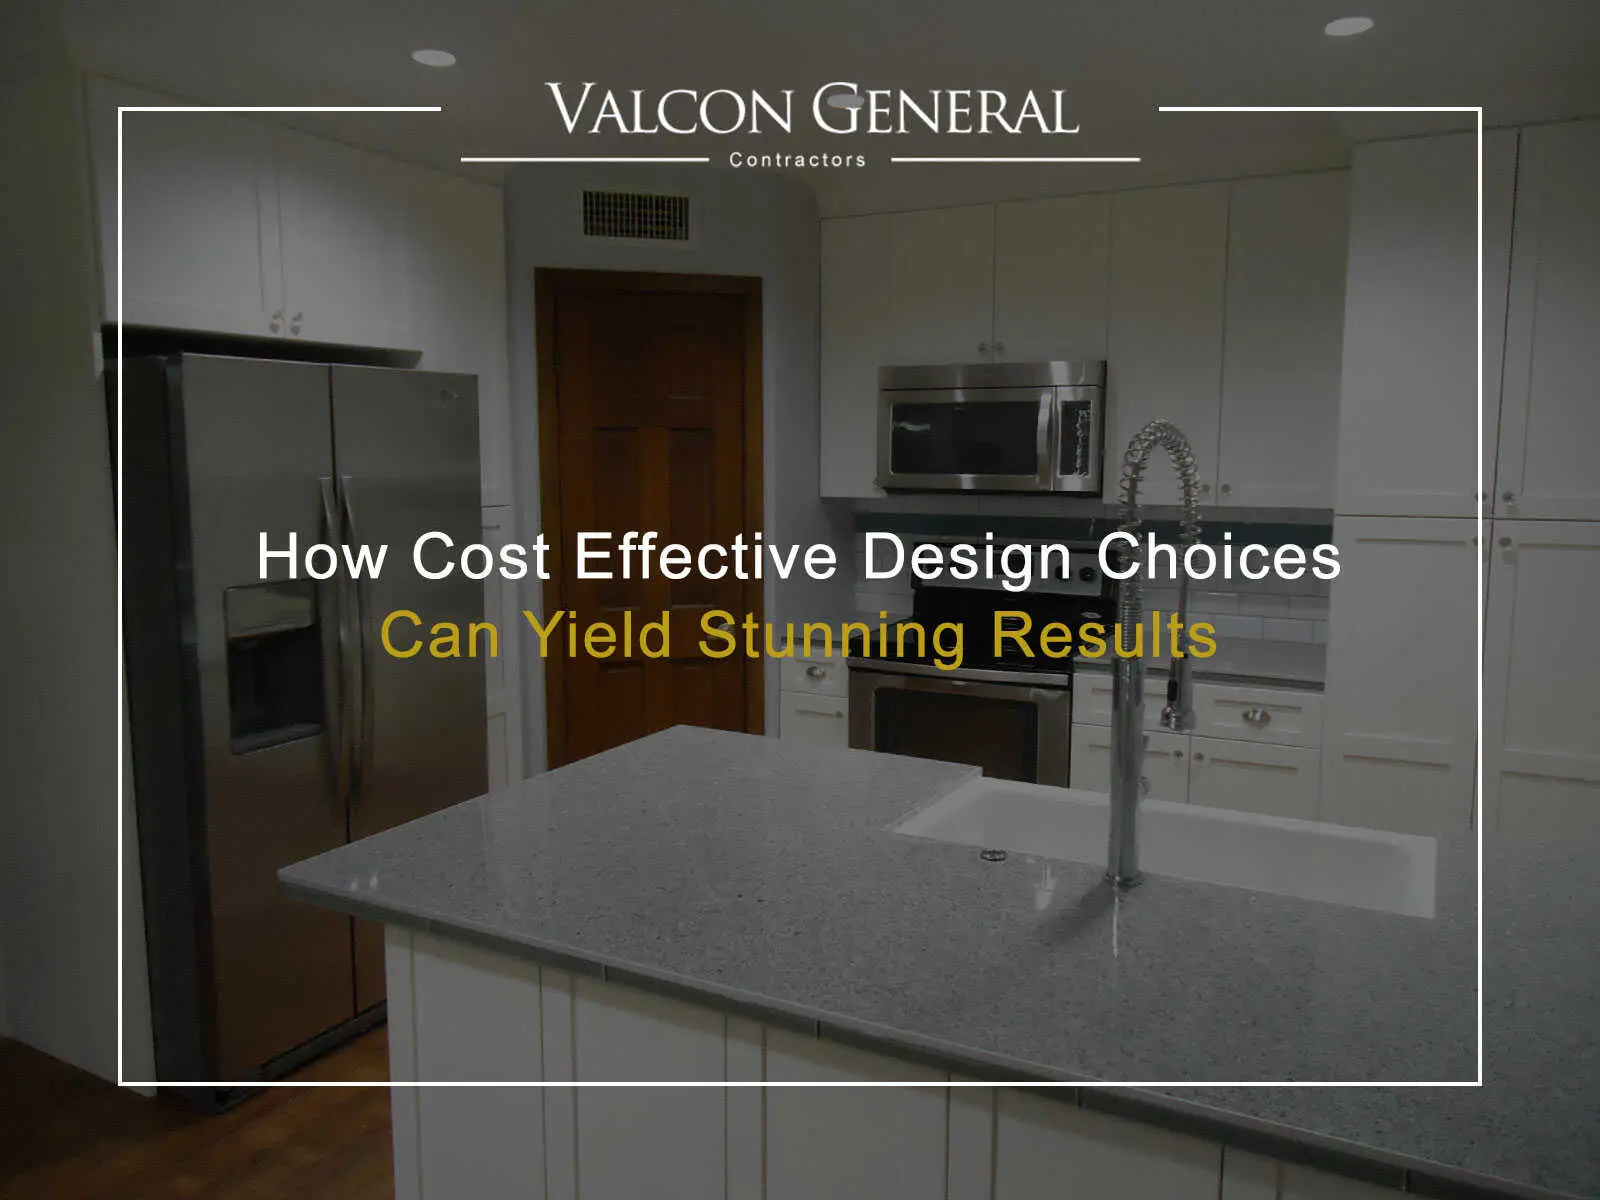 How Cost Effective Design Choices Can Yield Stunning Results